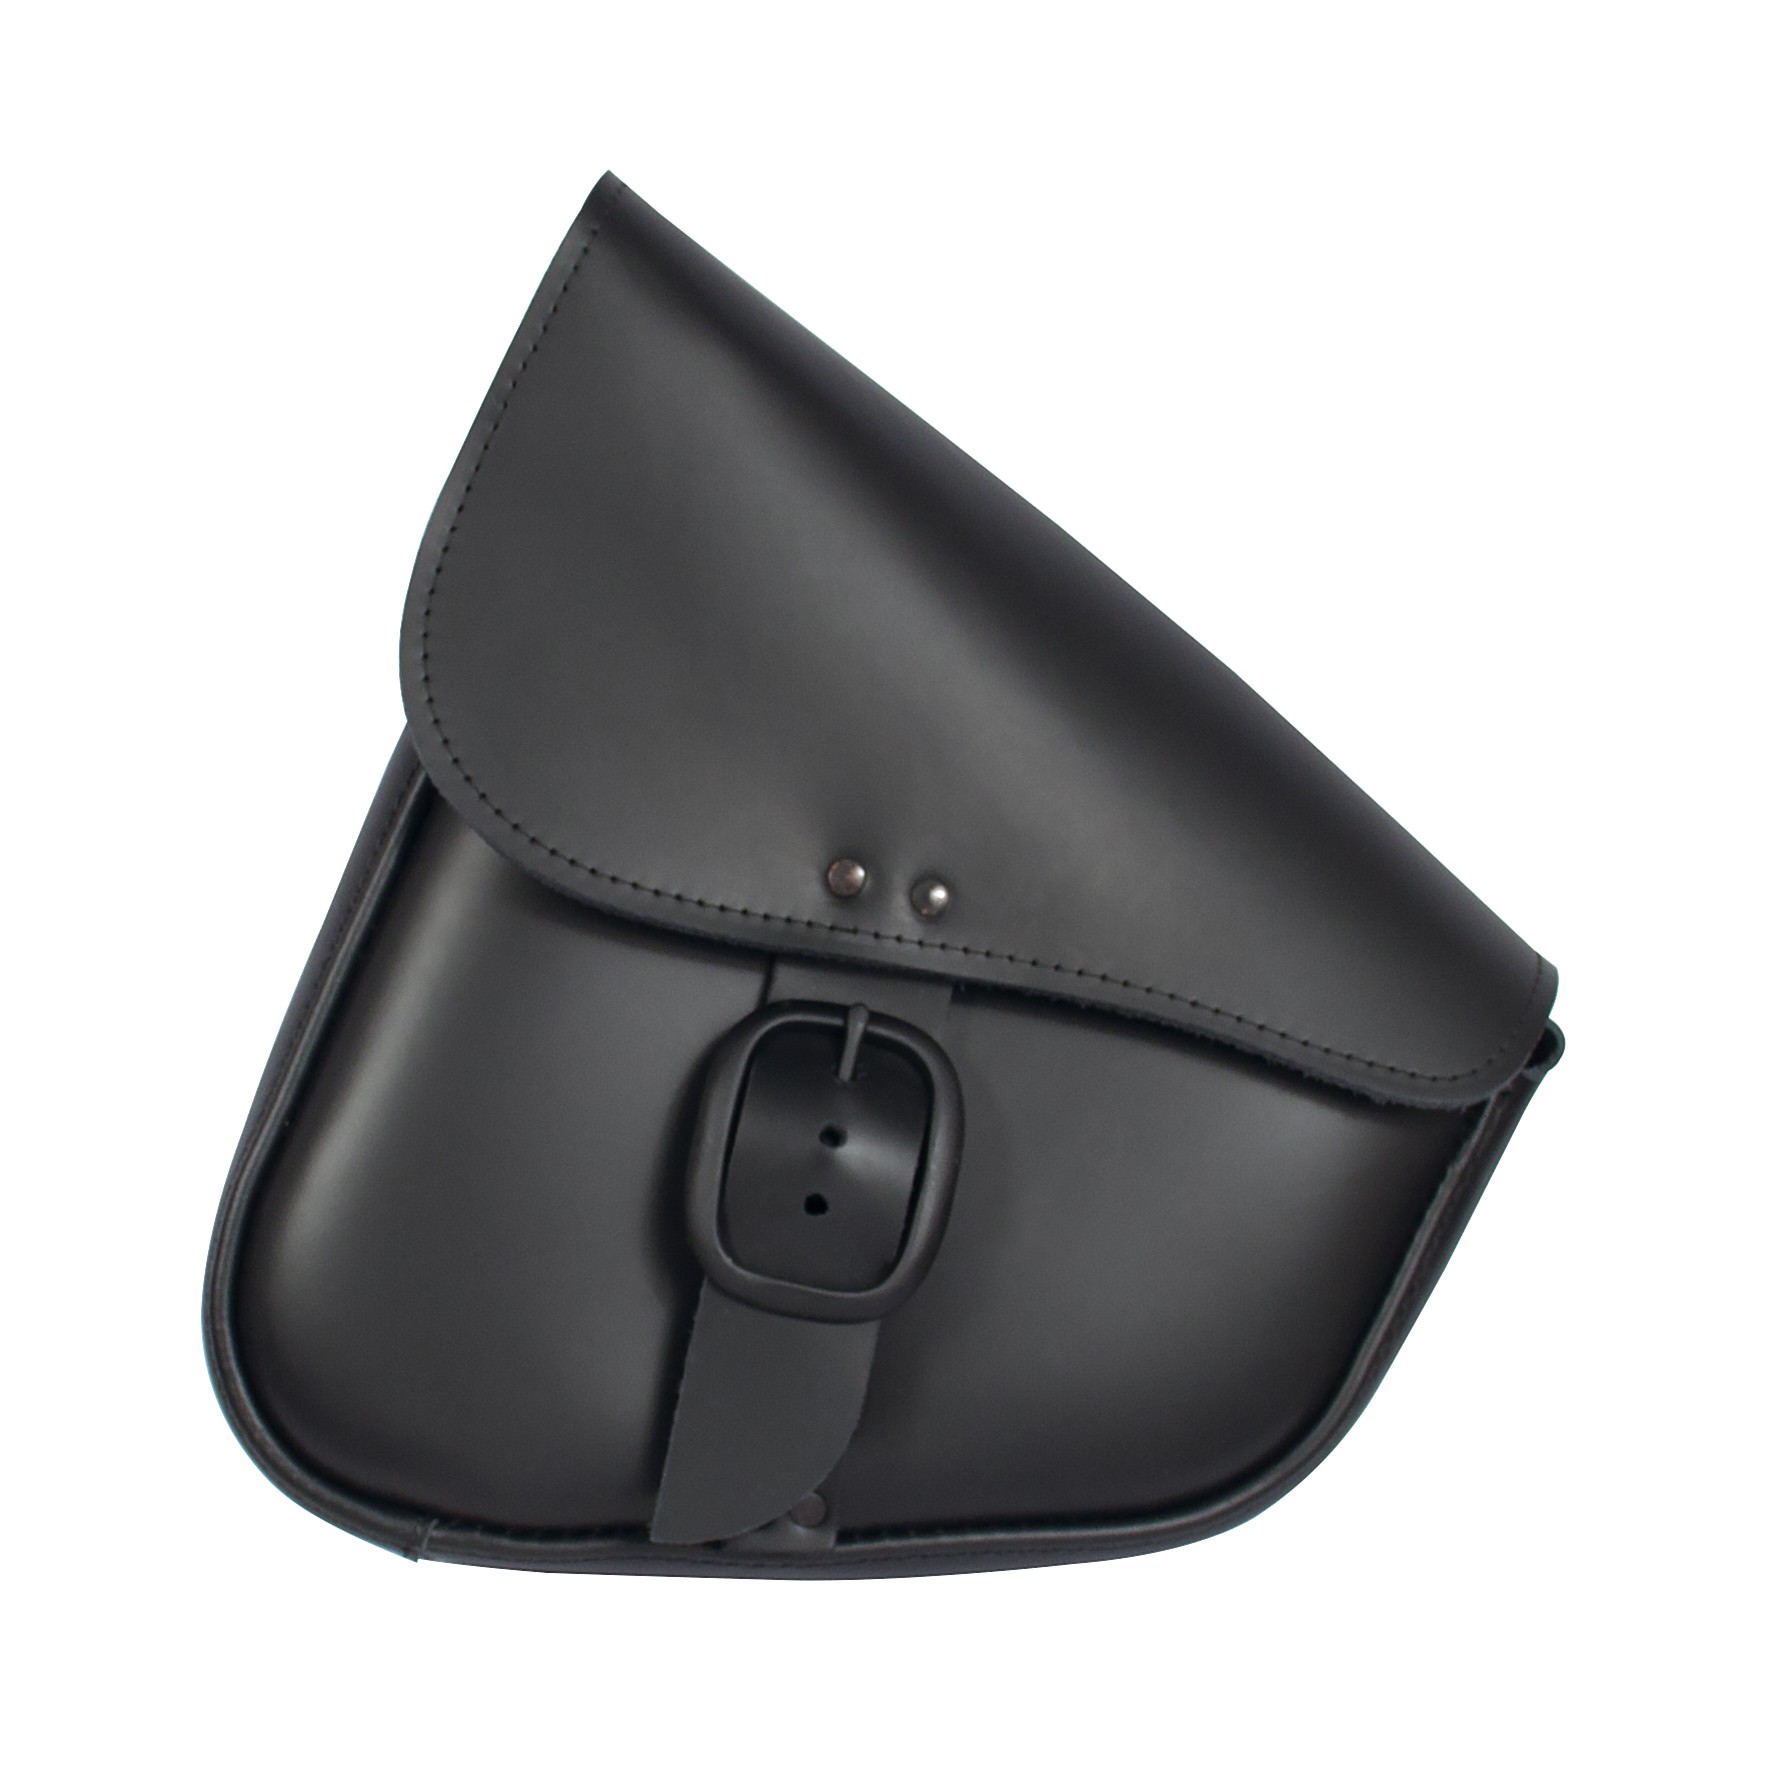 Willie & Max Black Leather Swingarm Bag with Matte Black Buckle